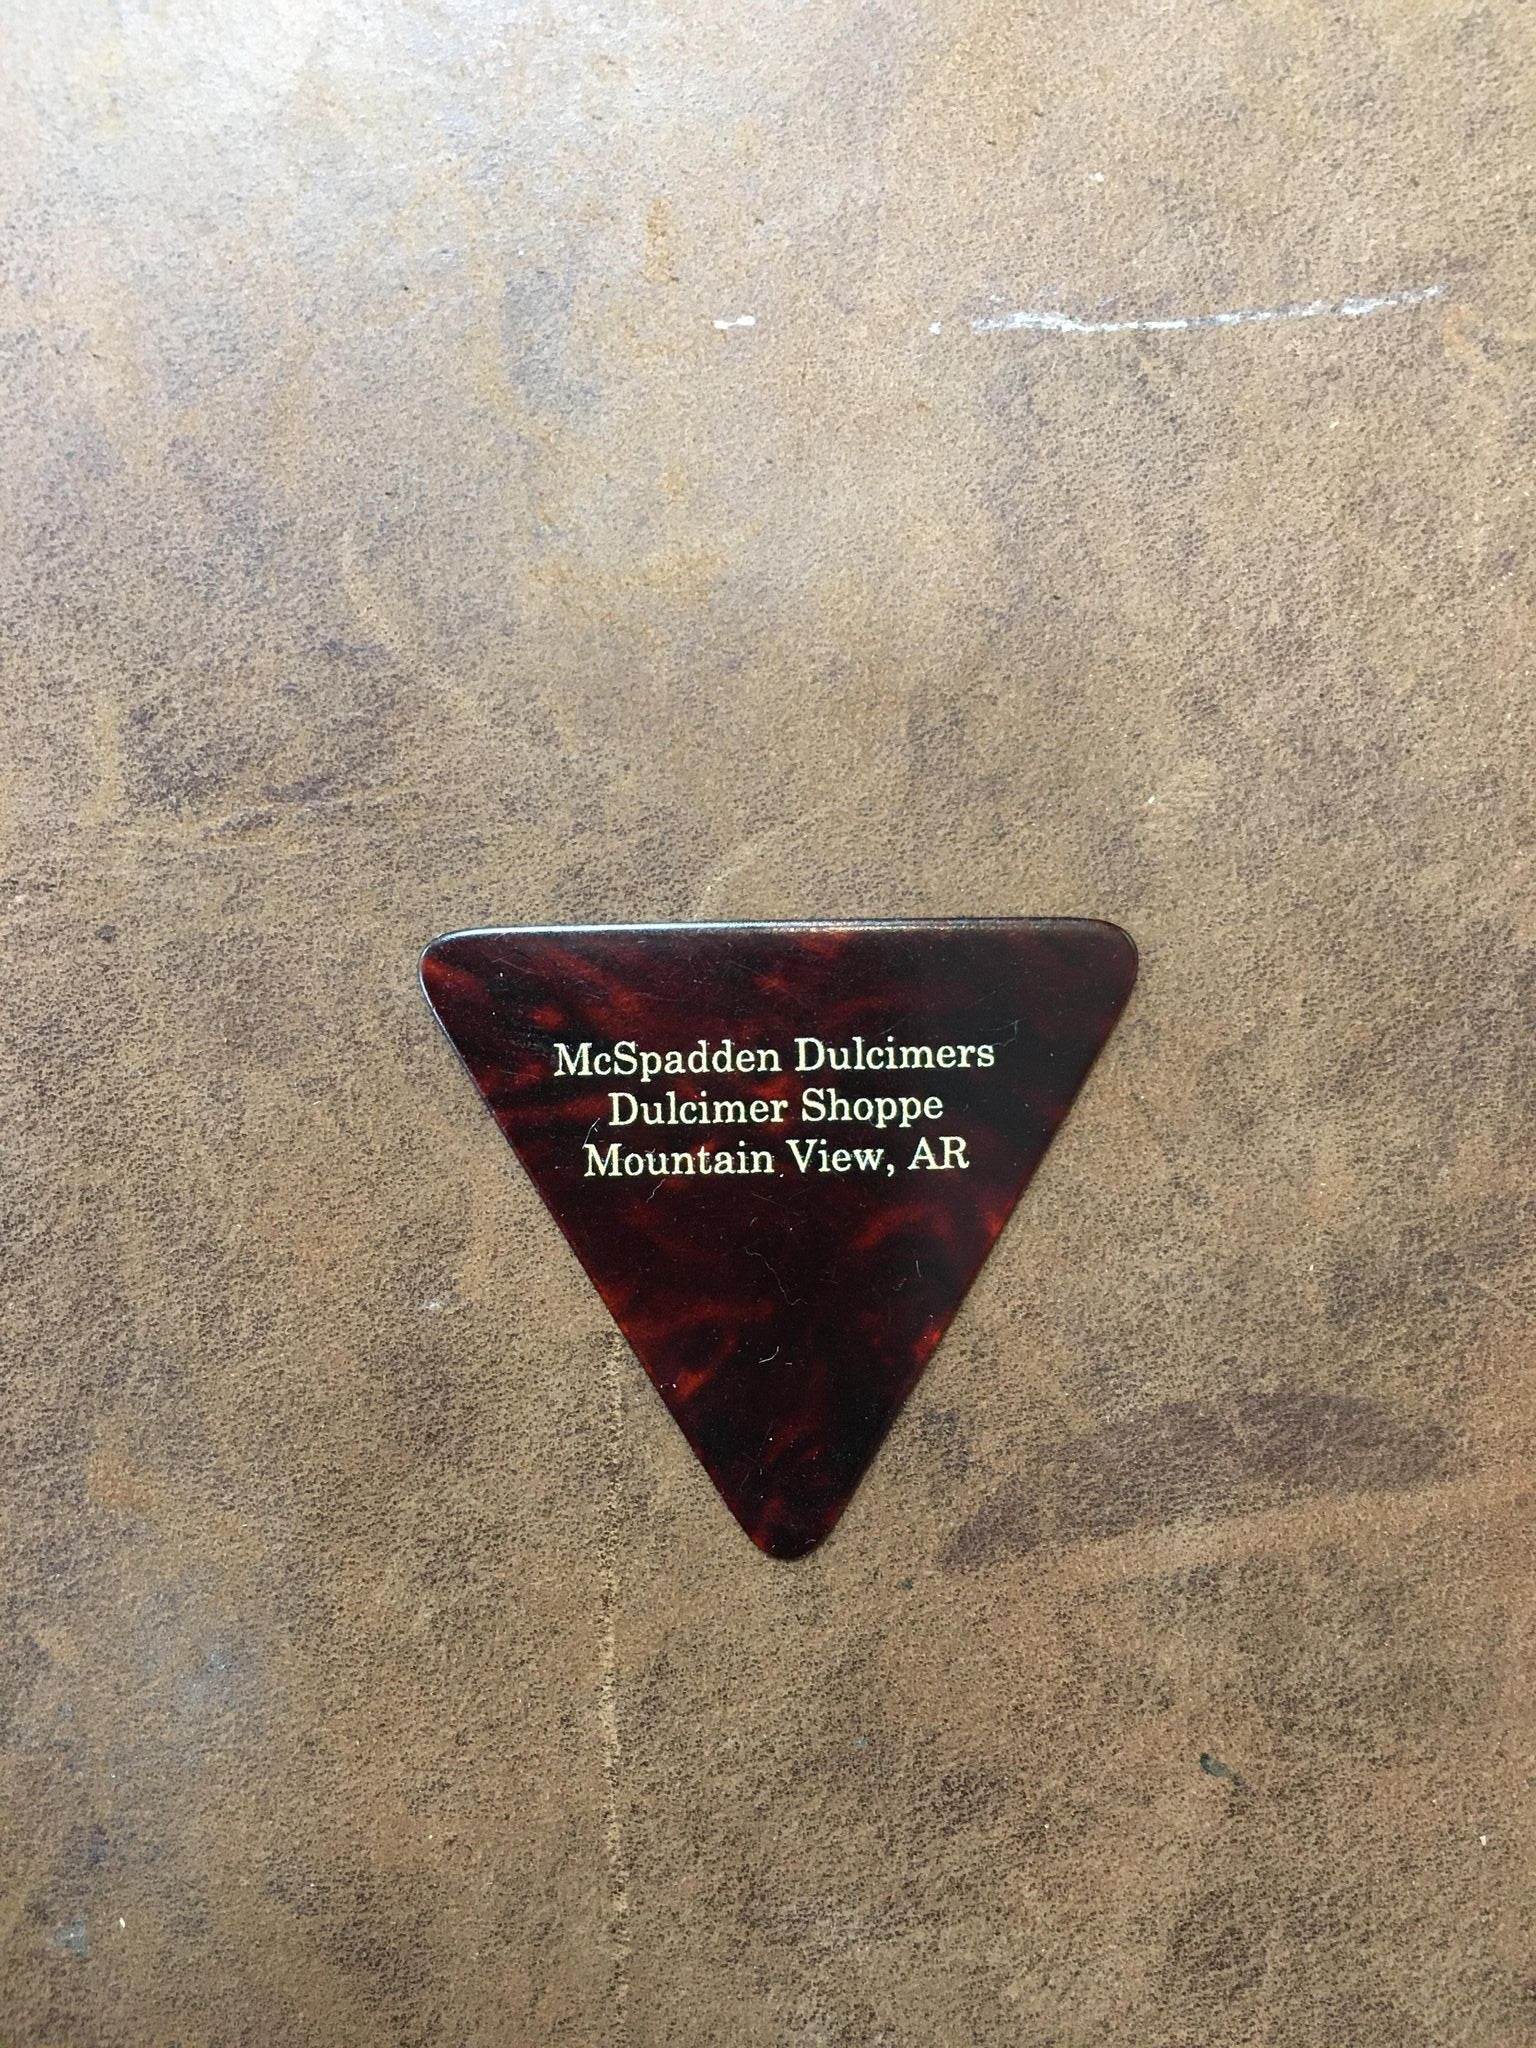 A Triangle pick with the words Nashville Diamonds on it.